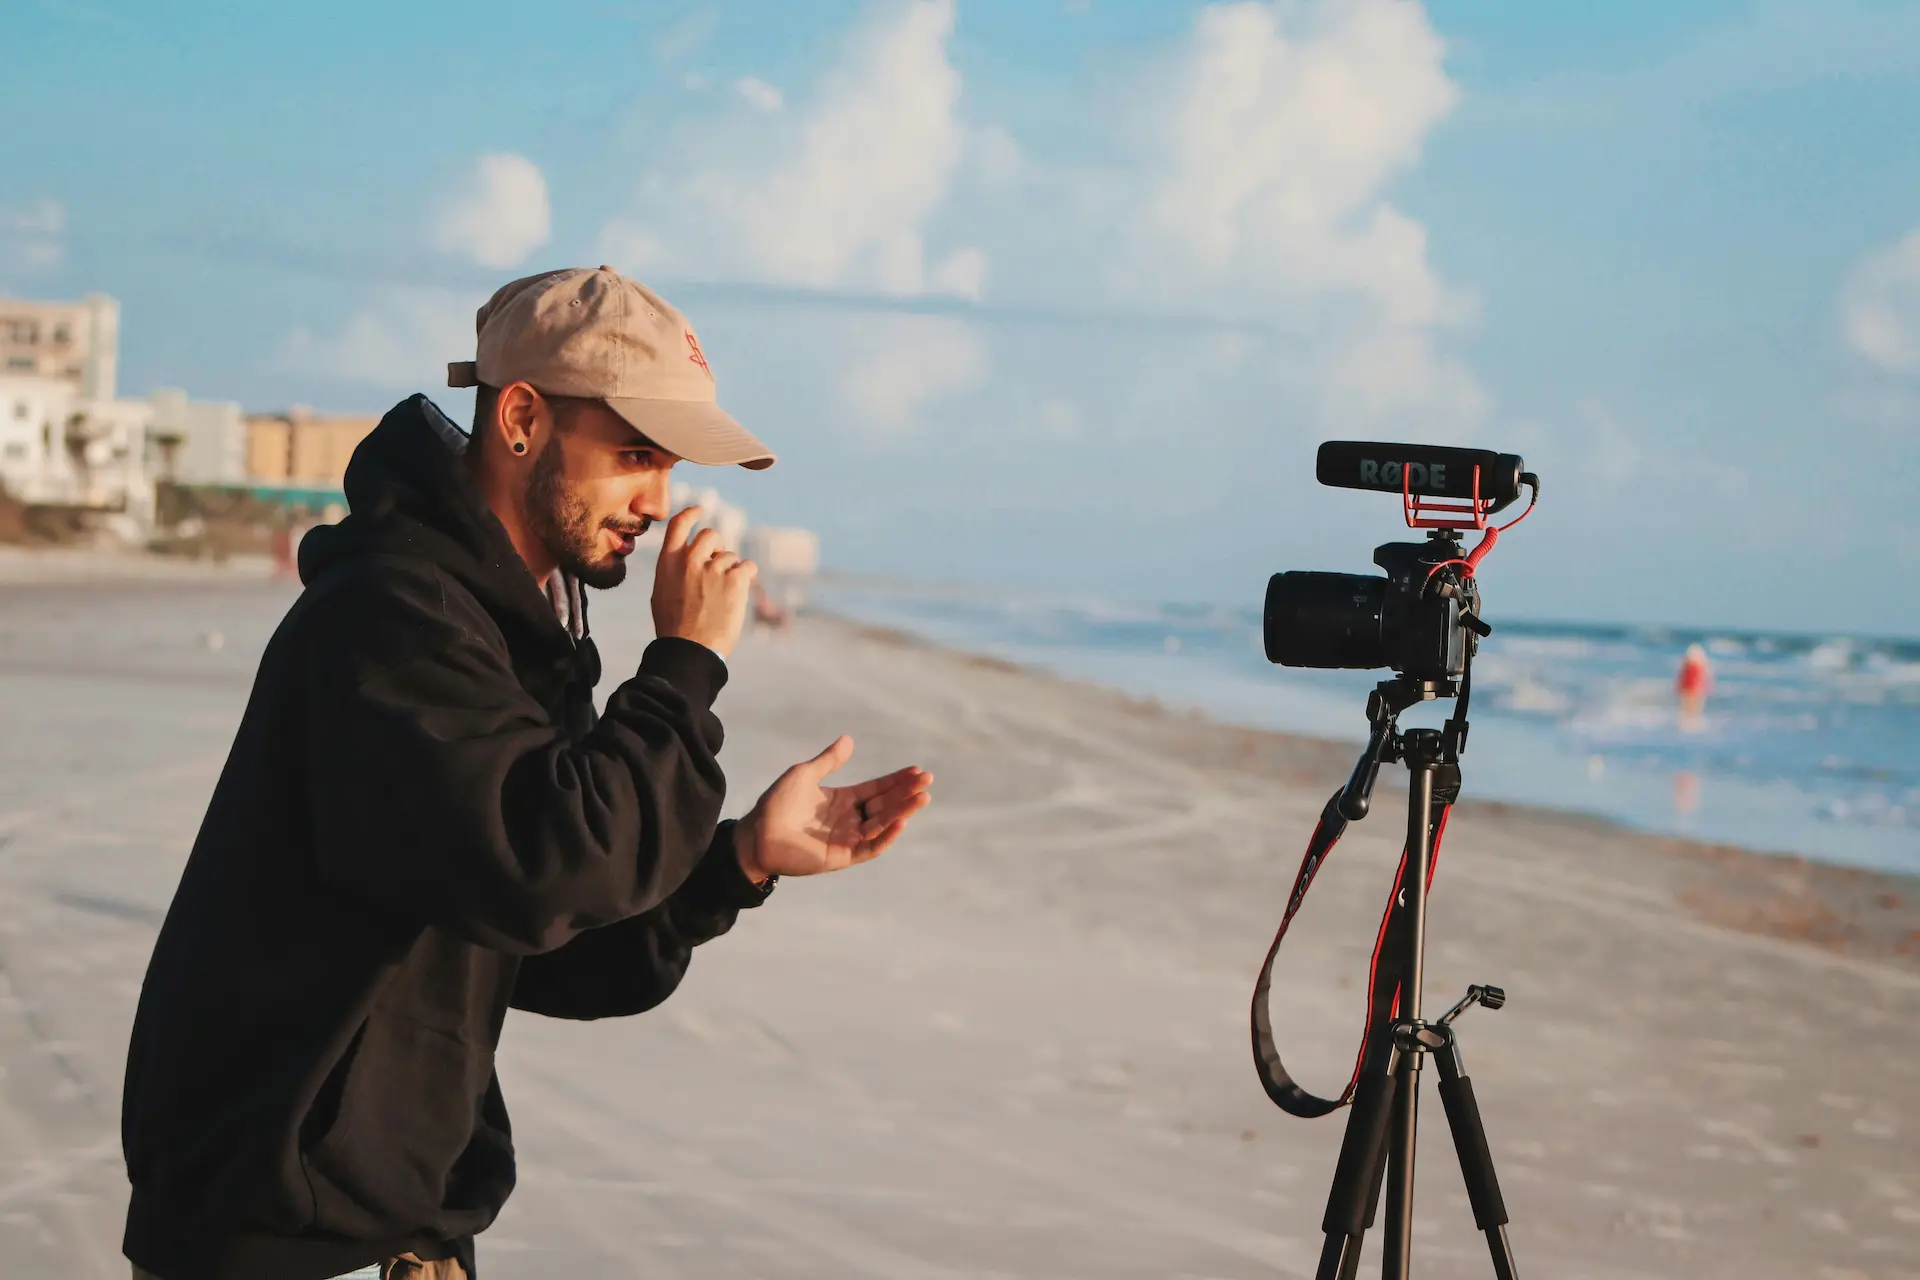 White guy on beach looking into a camera with a microphone on a tripod explaining something for a recording.